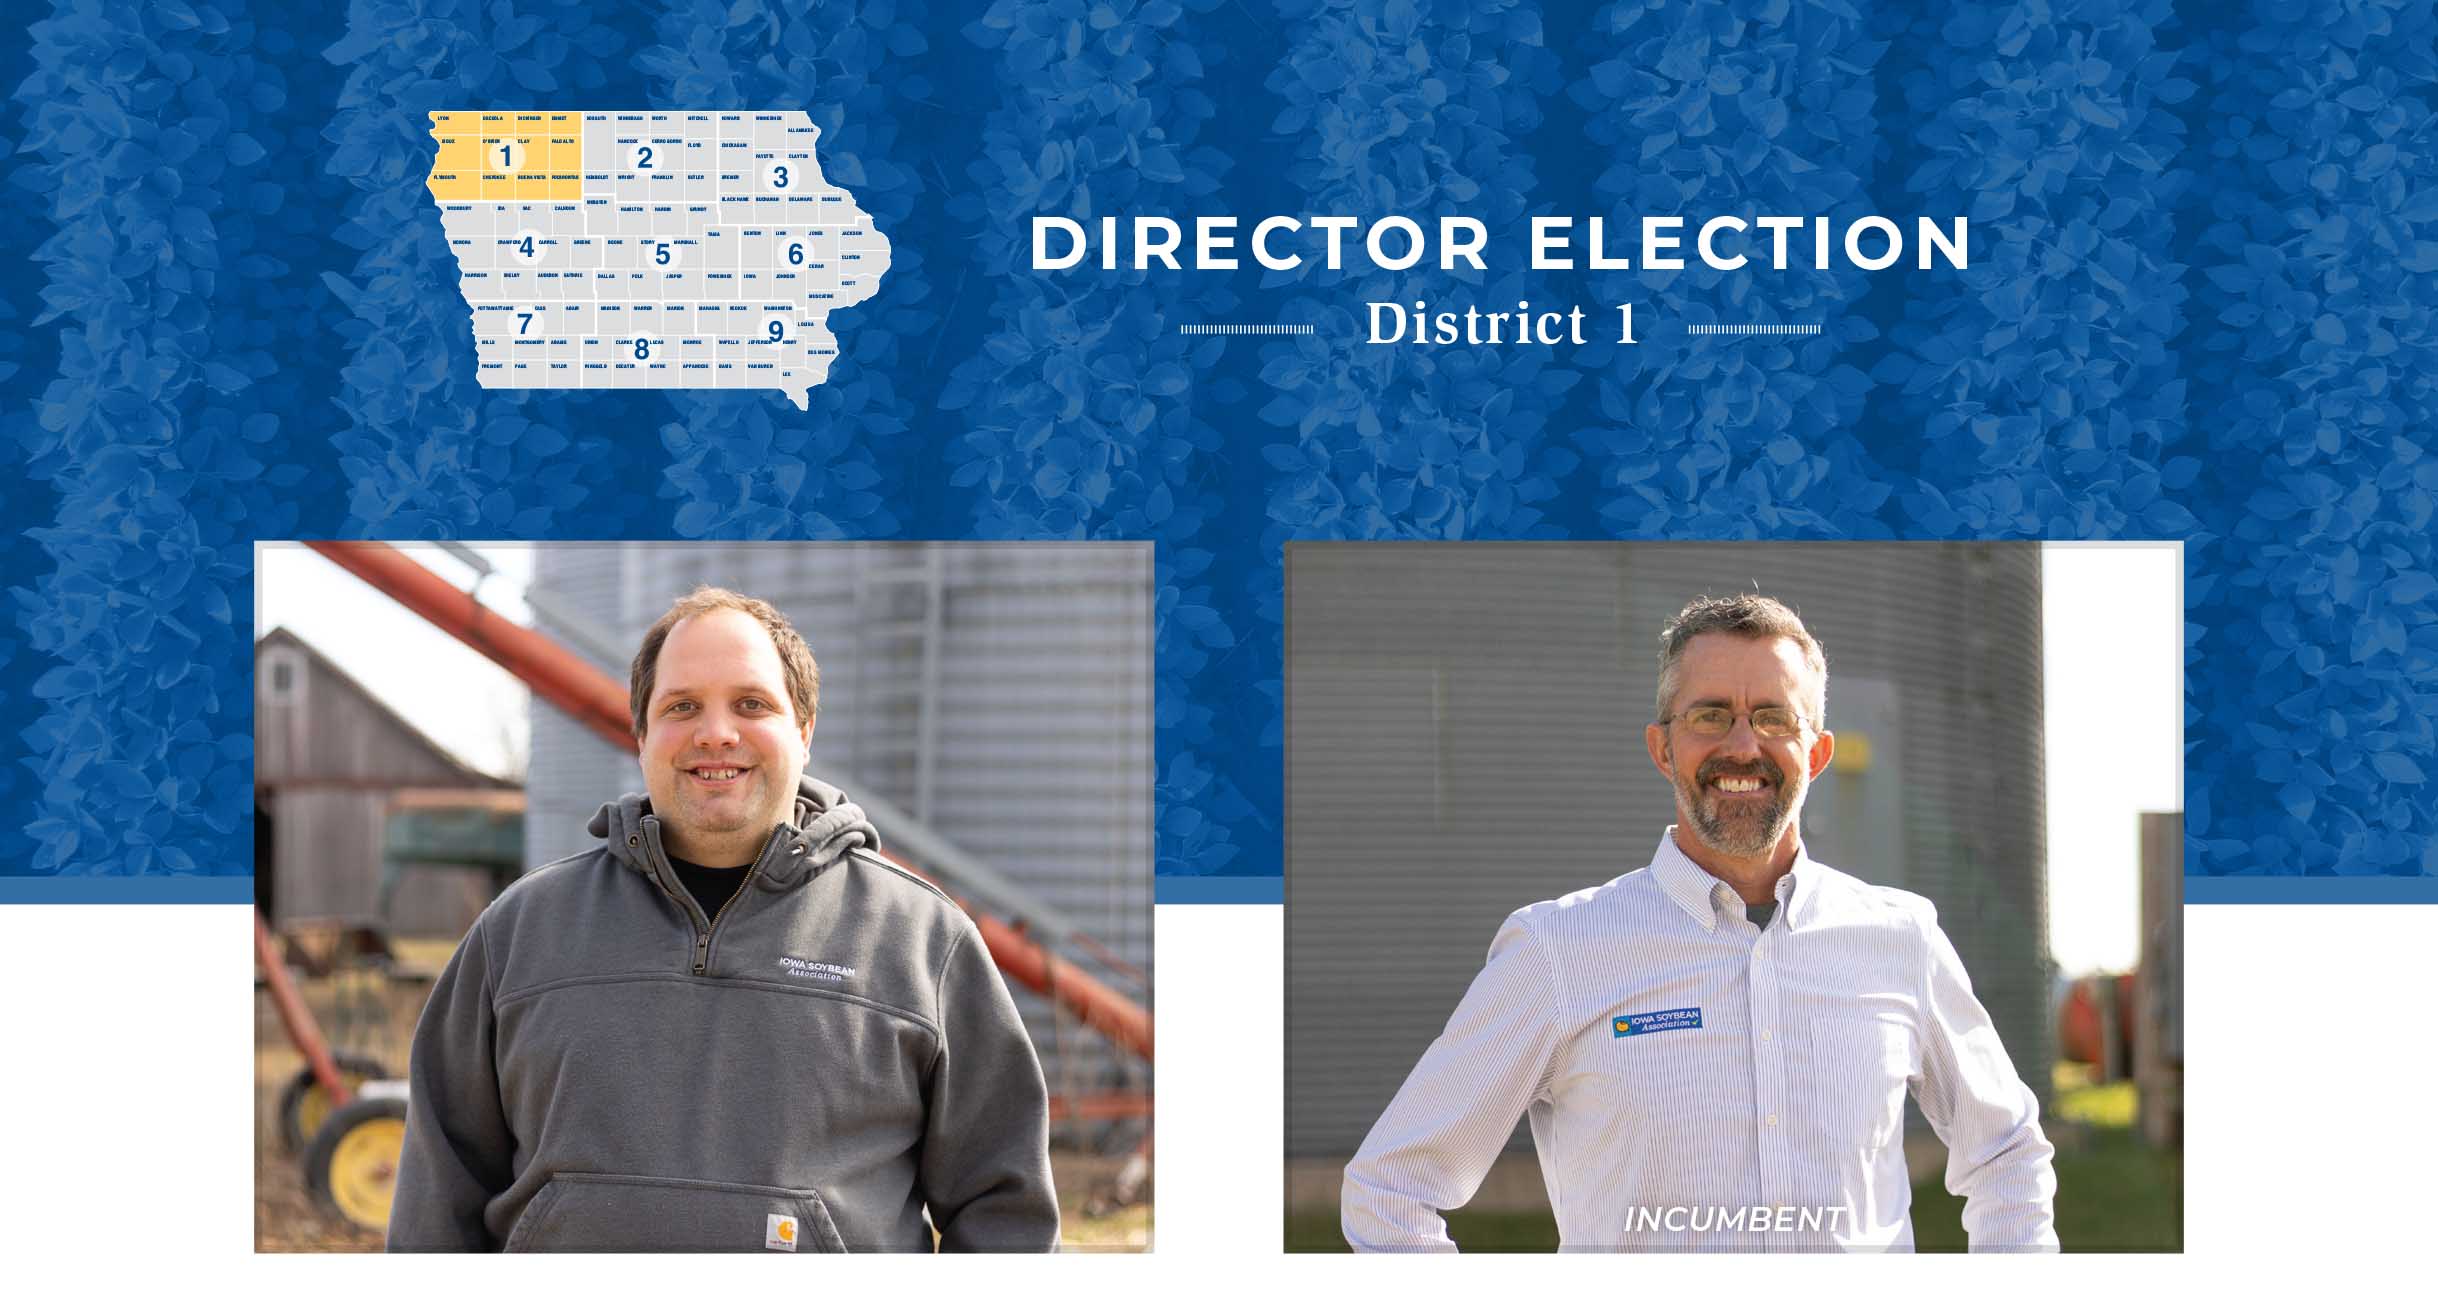 Farmers running for District 1